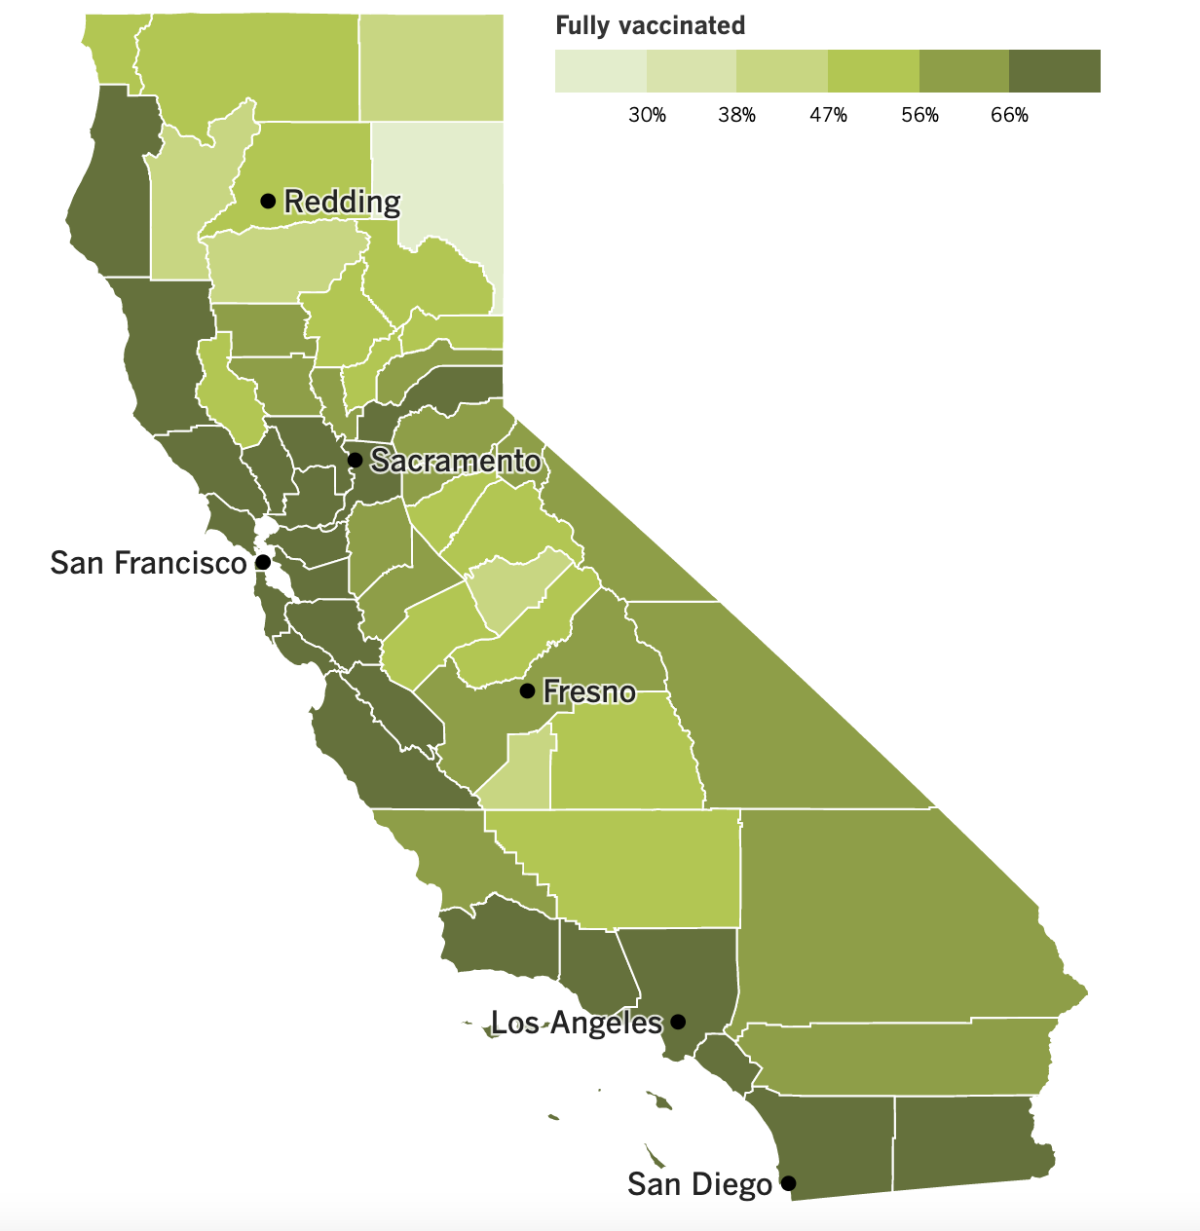 A map showing California's COVID-19 vaccination progress by county as of July 5, 2022.